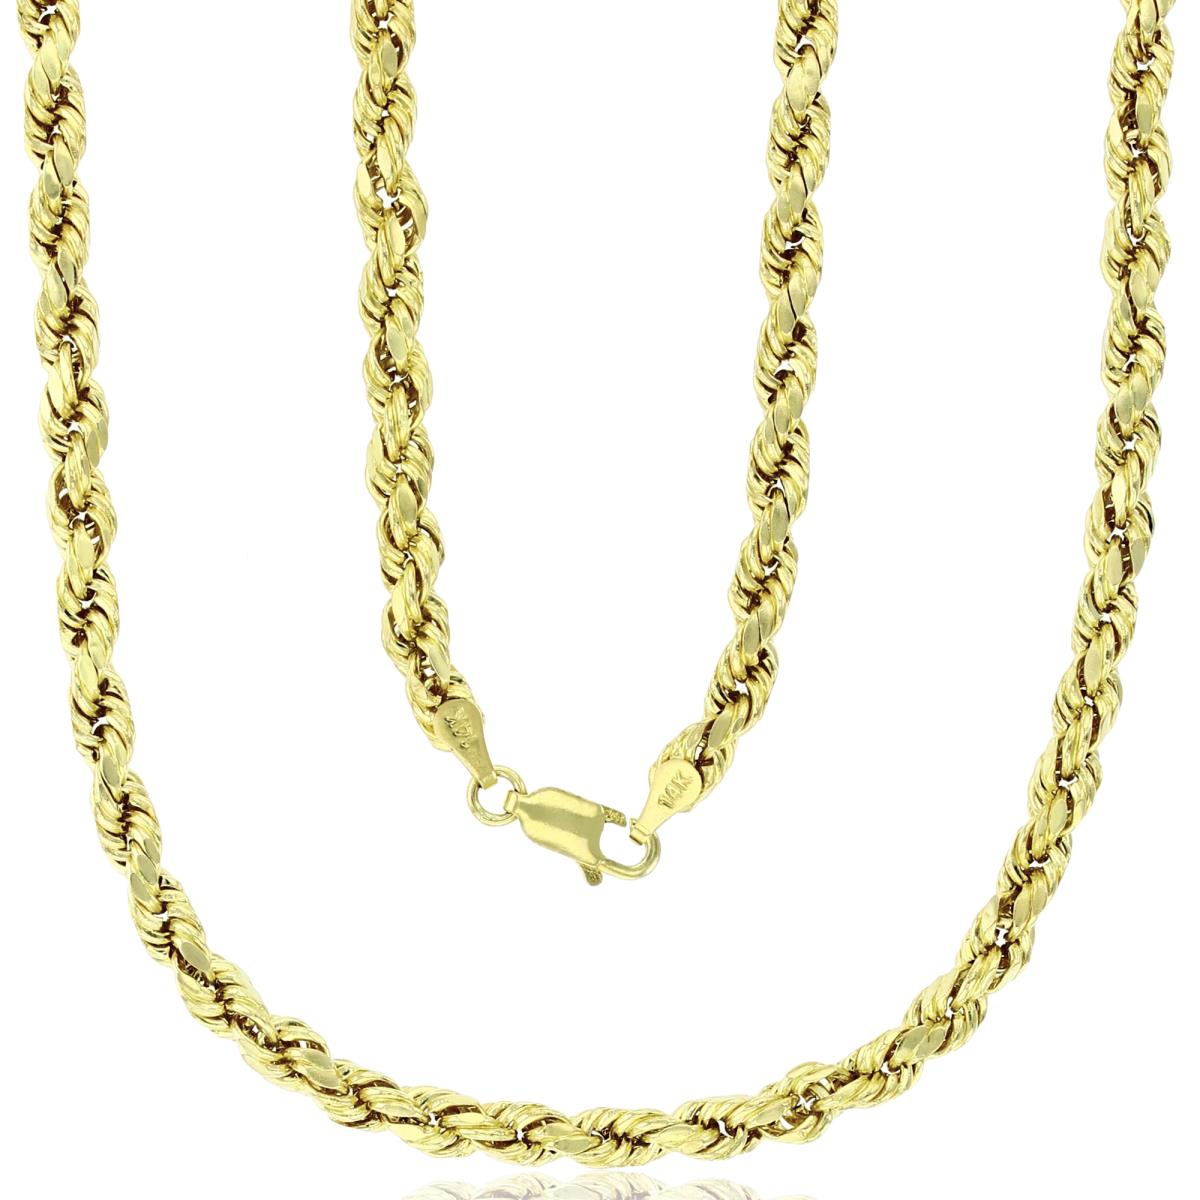 10k Yellow Gold 4mm Hollow DC Rope 030 7" Chain Bracelet